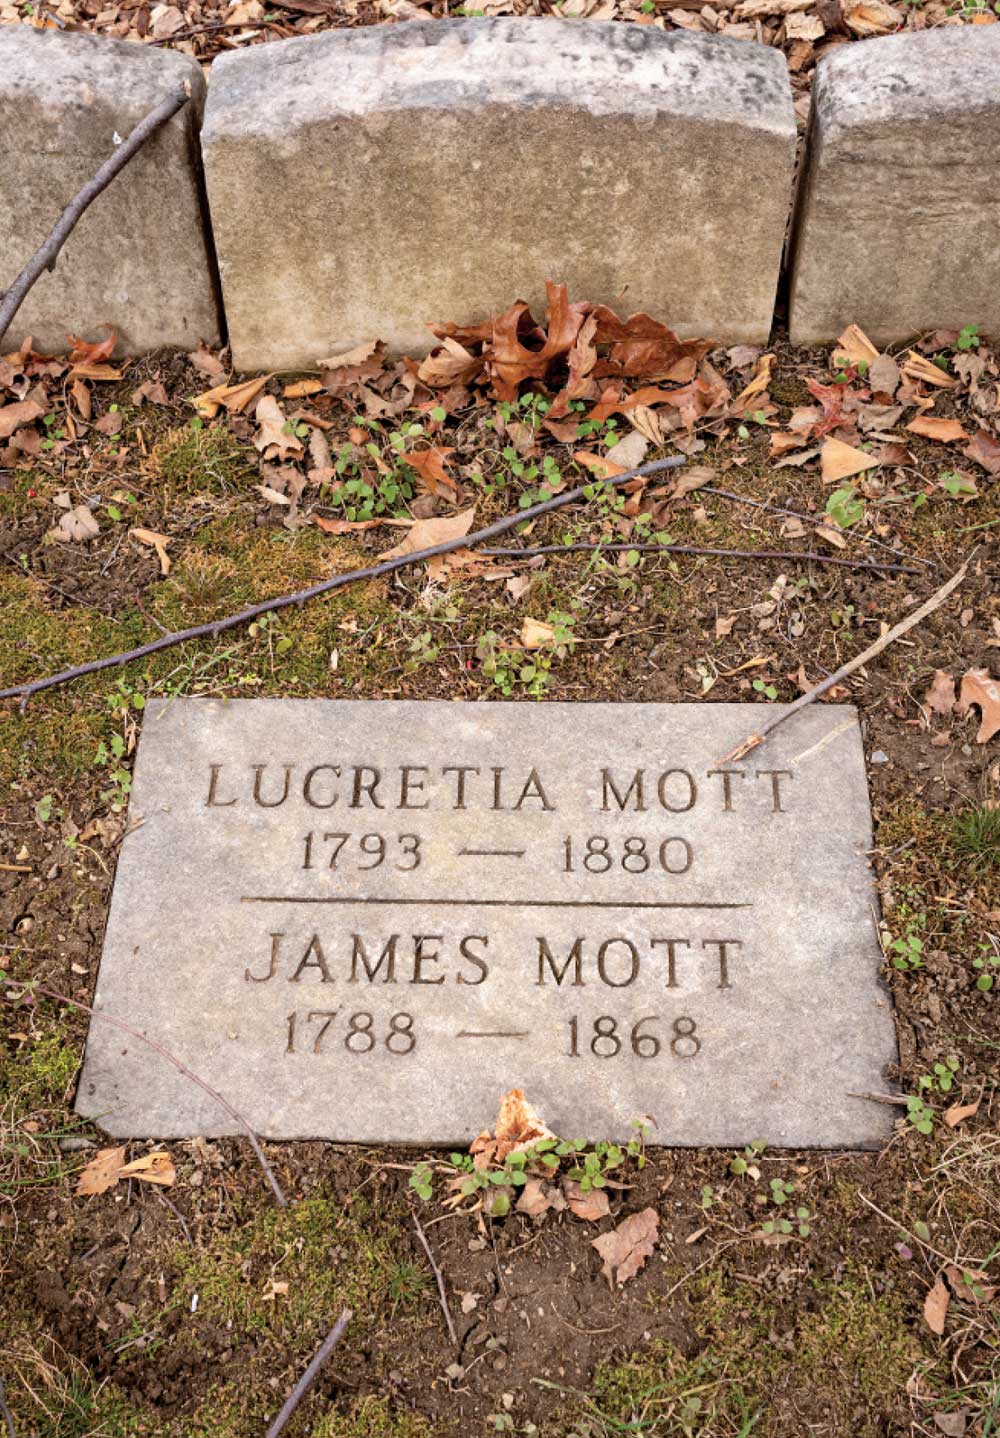 A burial marker for Lucretia and James Mott on the ground in a cemetery.